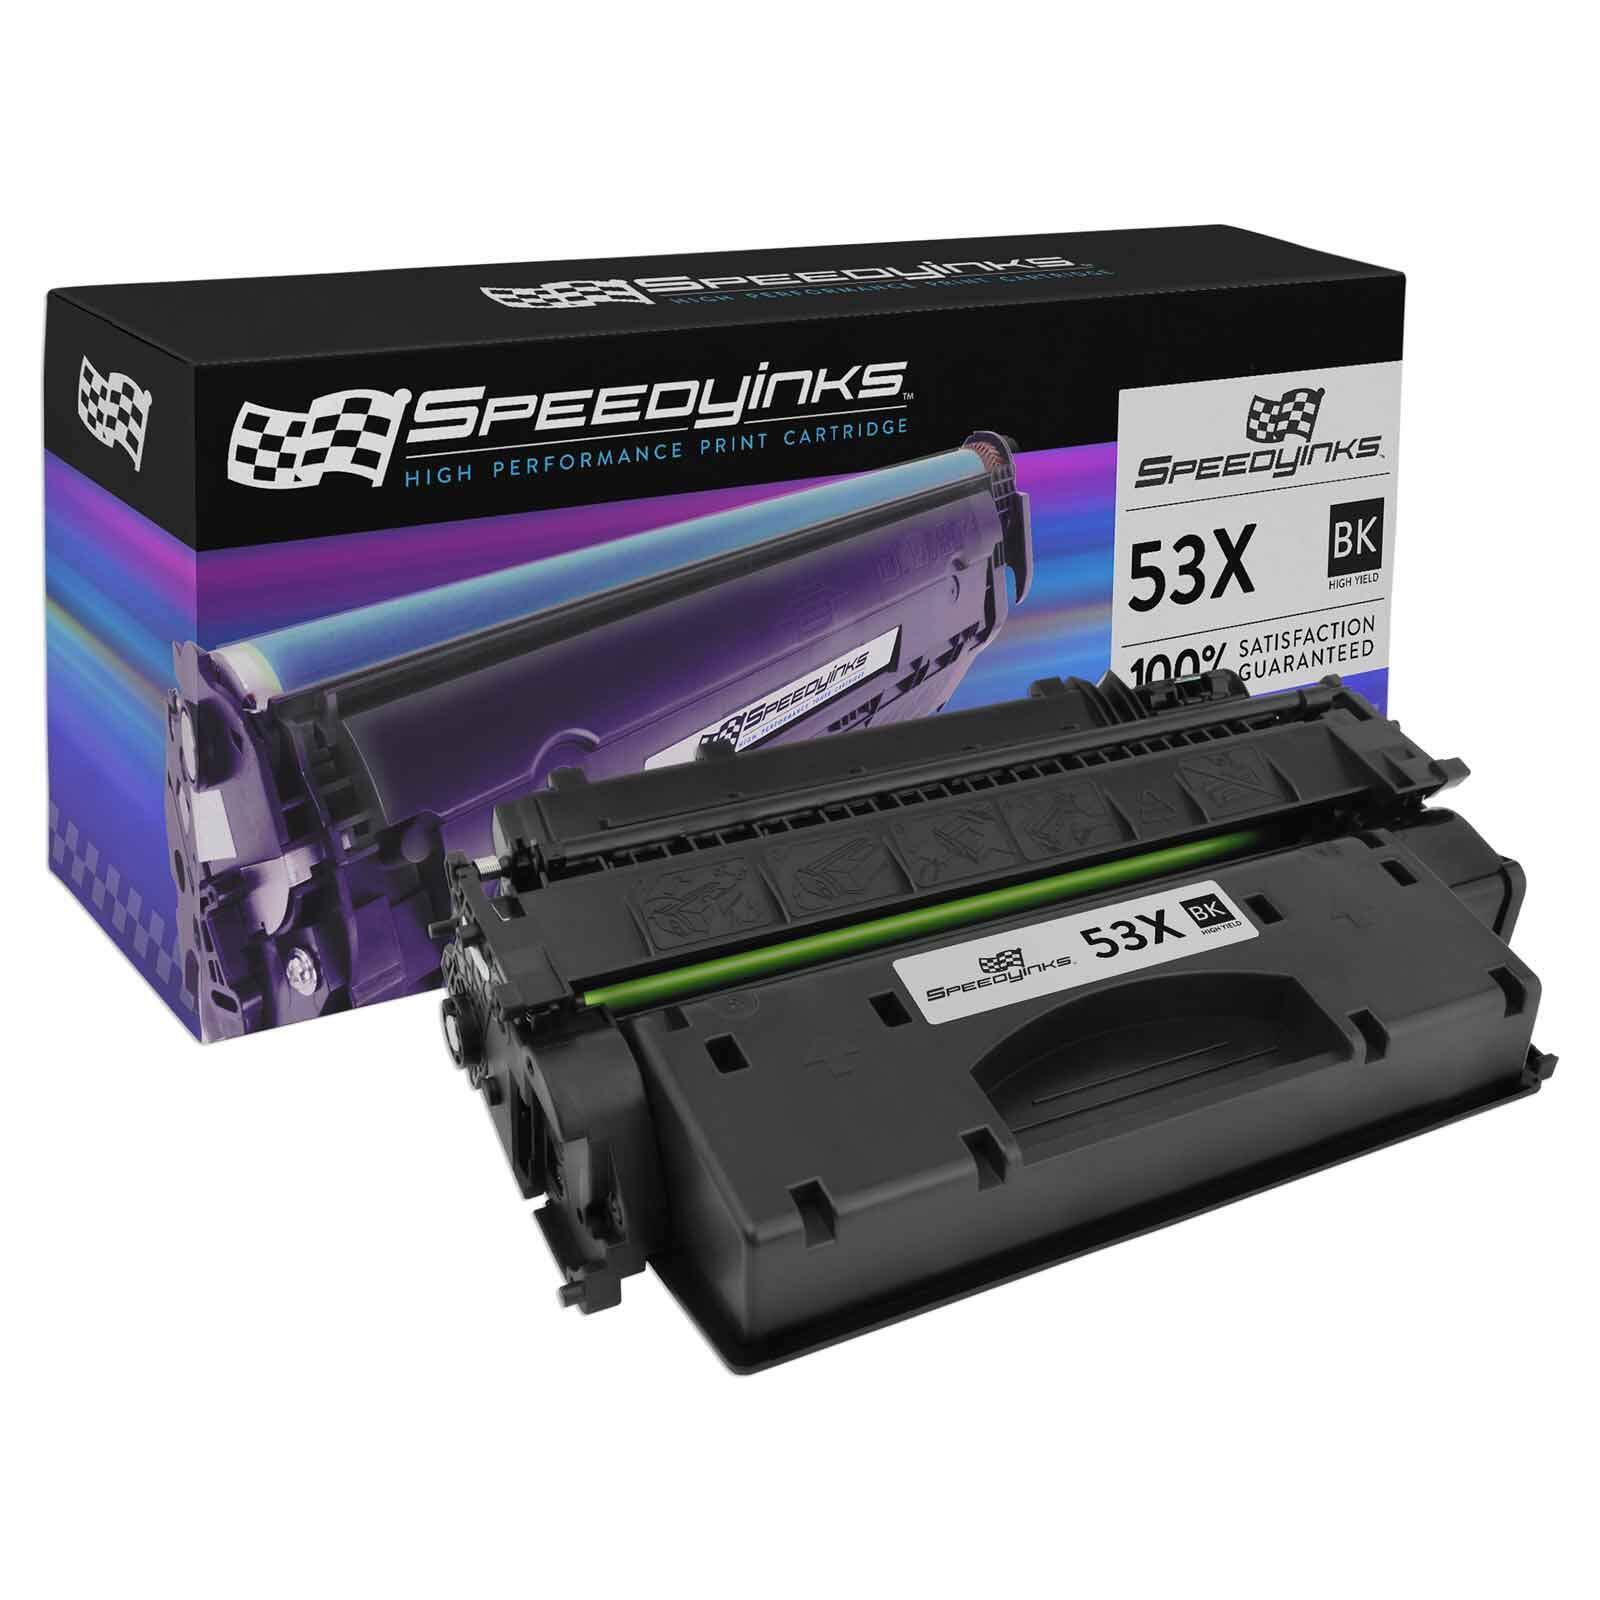 SPEEDYINKS Compatible Toner Cartridge Replacement HP 53X Q7553X HY Black